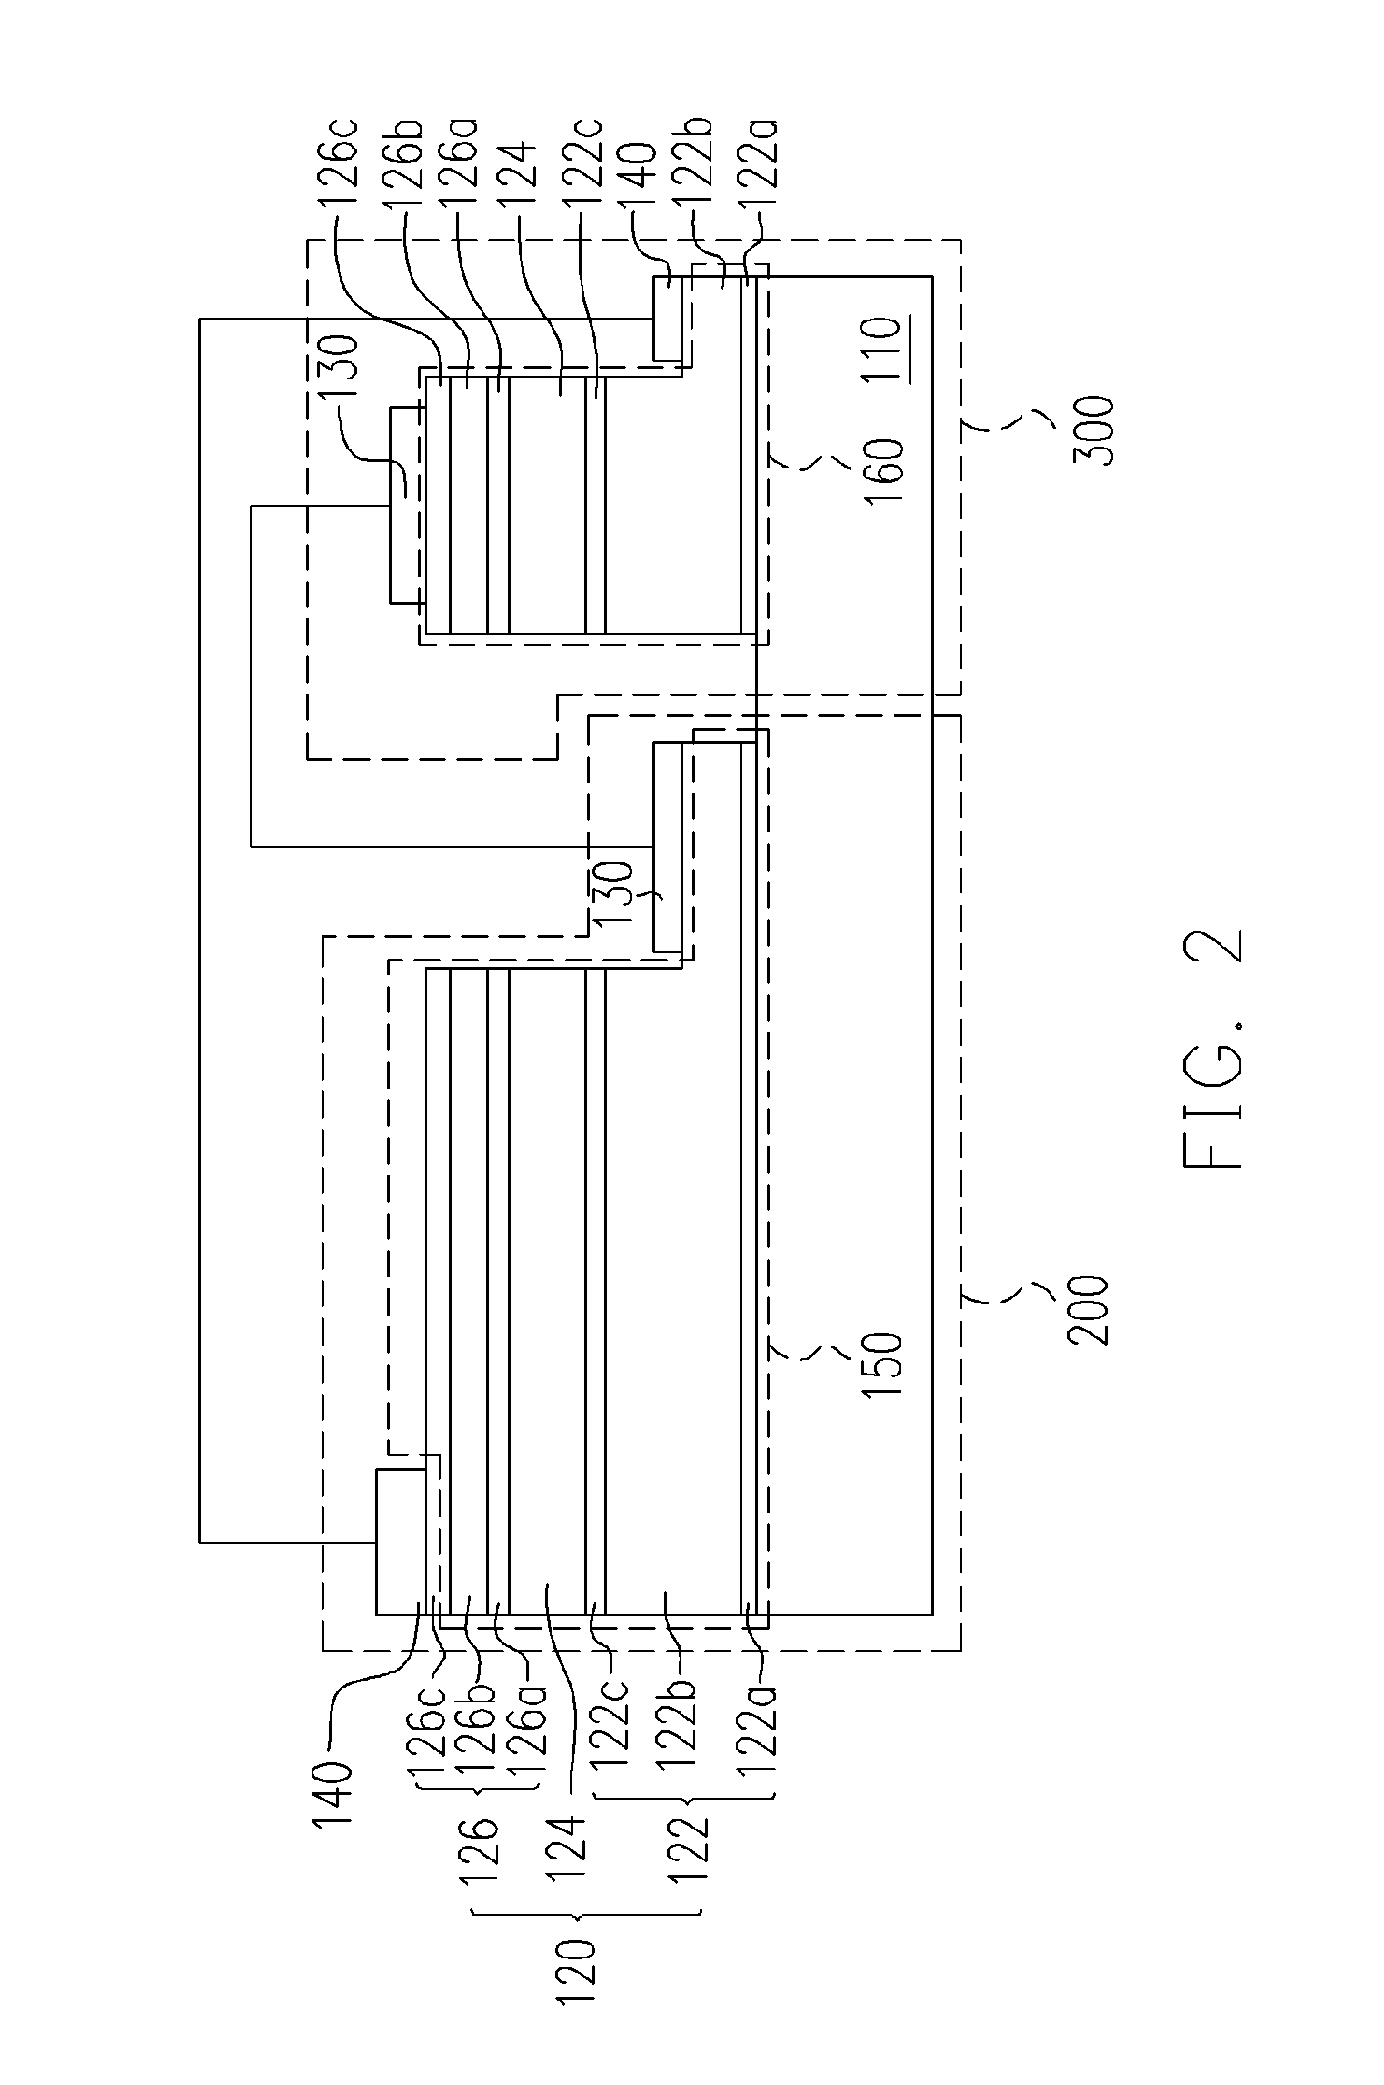 Light-emitting diode structure with electrostatic discharge protection